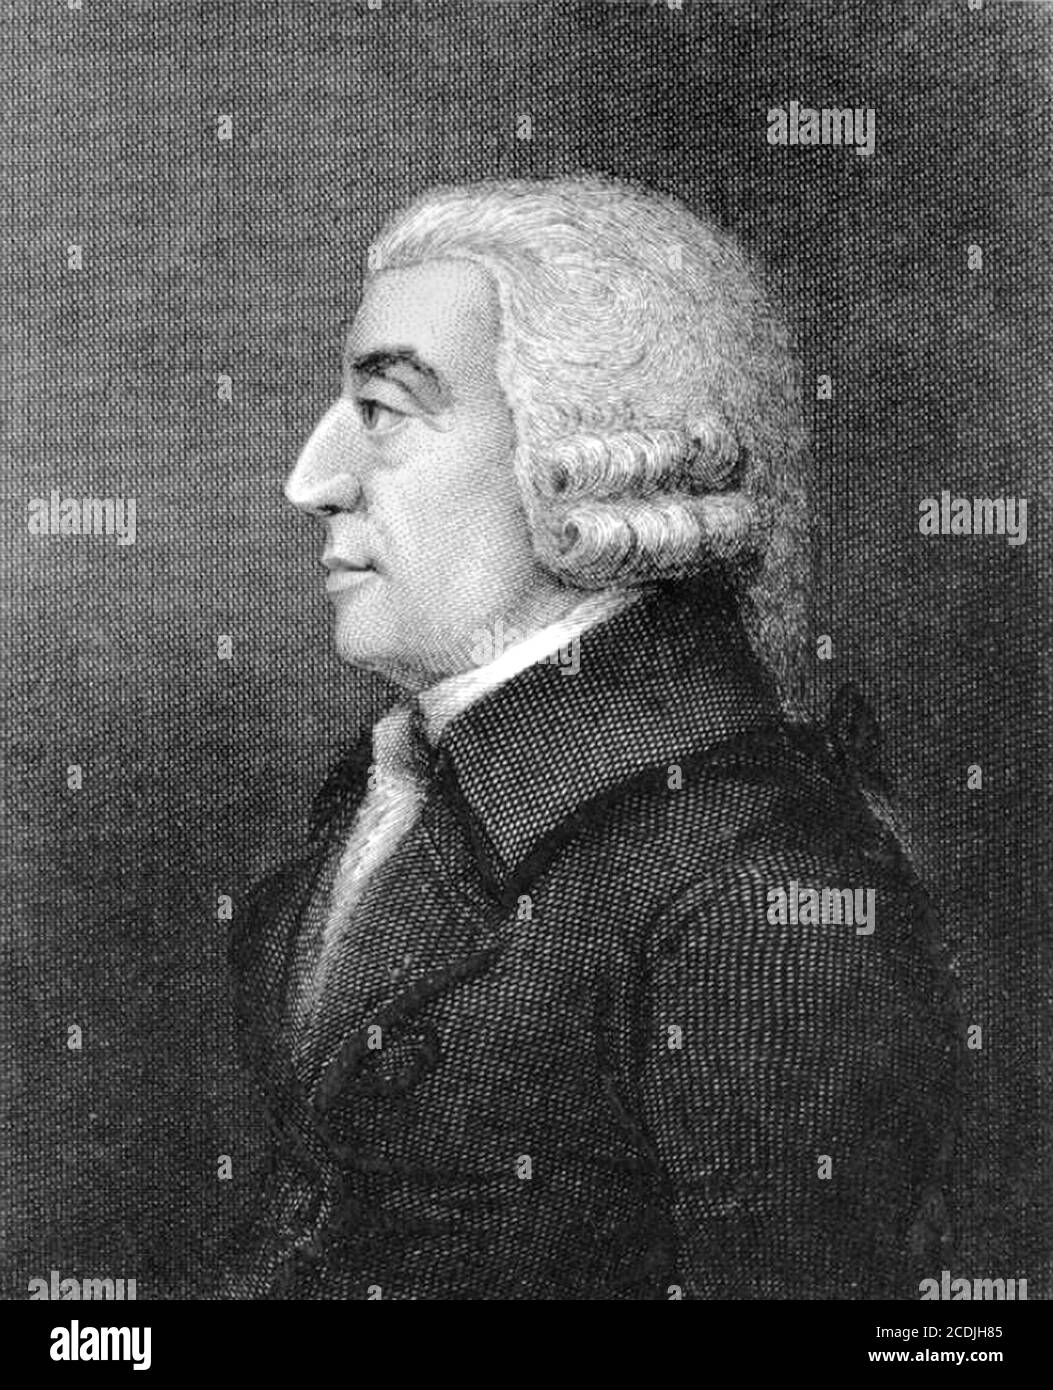 Adam Smith (1723-1790), engraving by Robert Graves, early 19th century Stock Photo